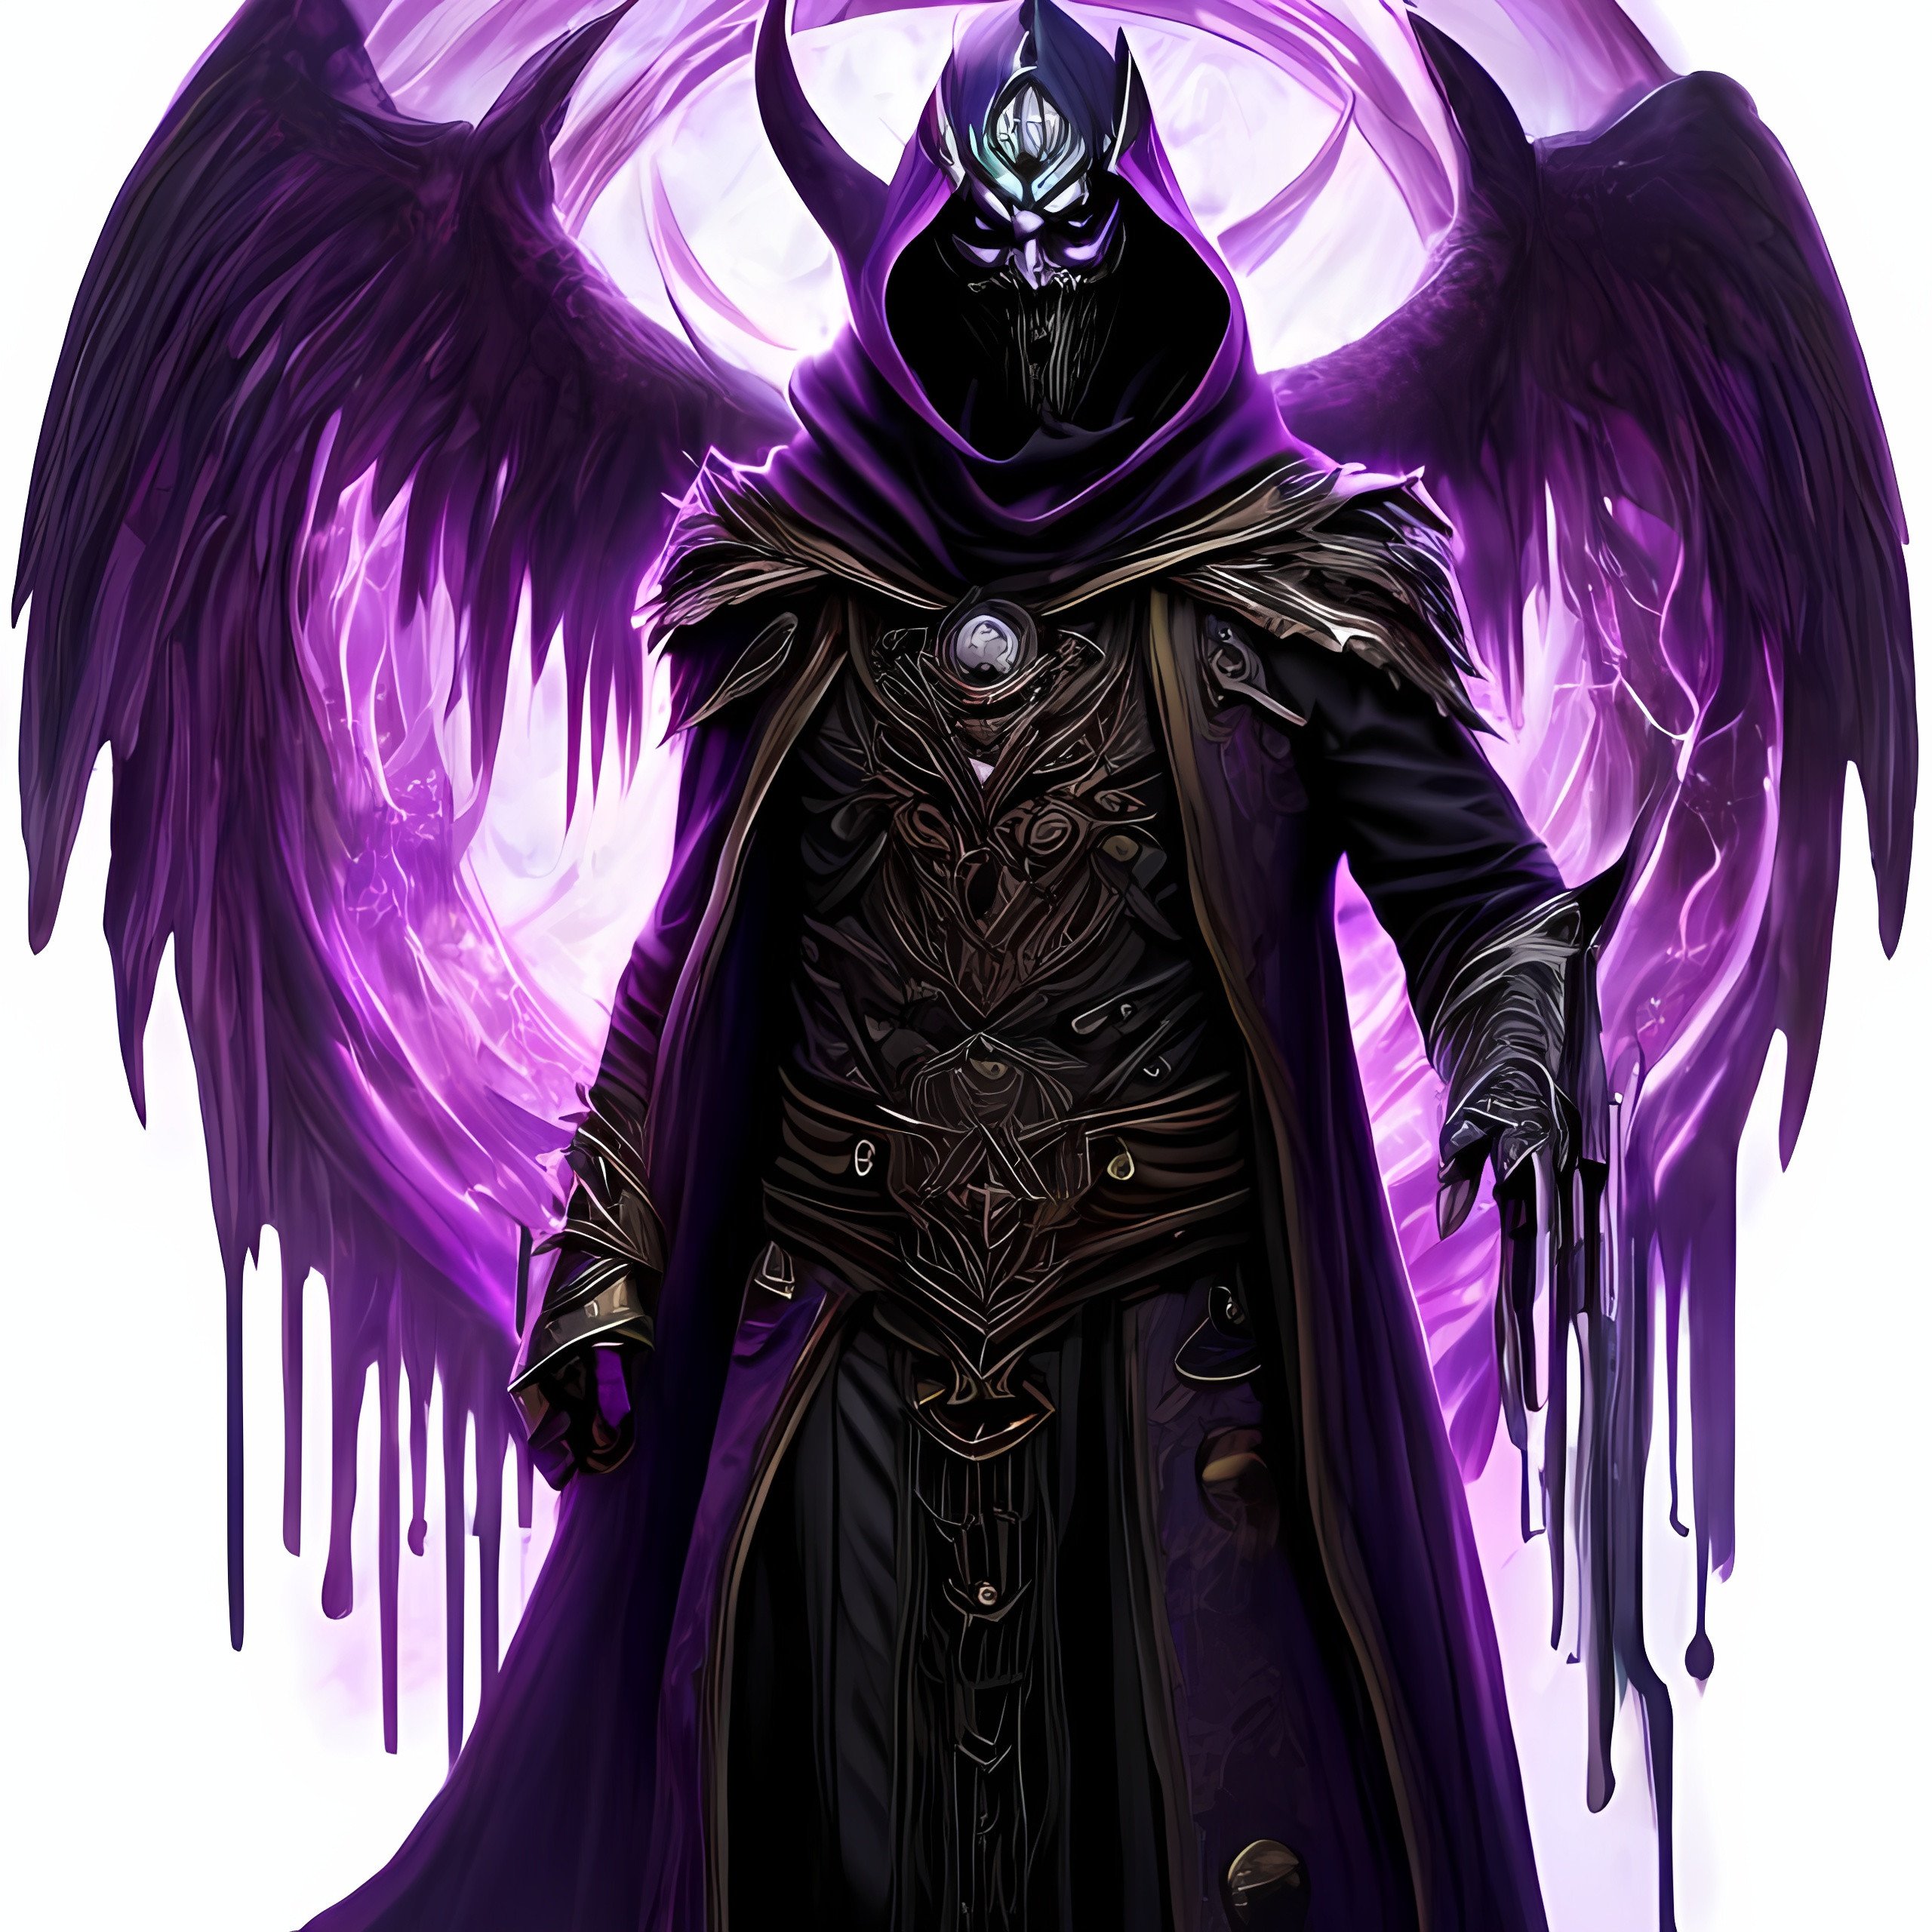 Full-body image of a cosmic masked warlock from valorant